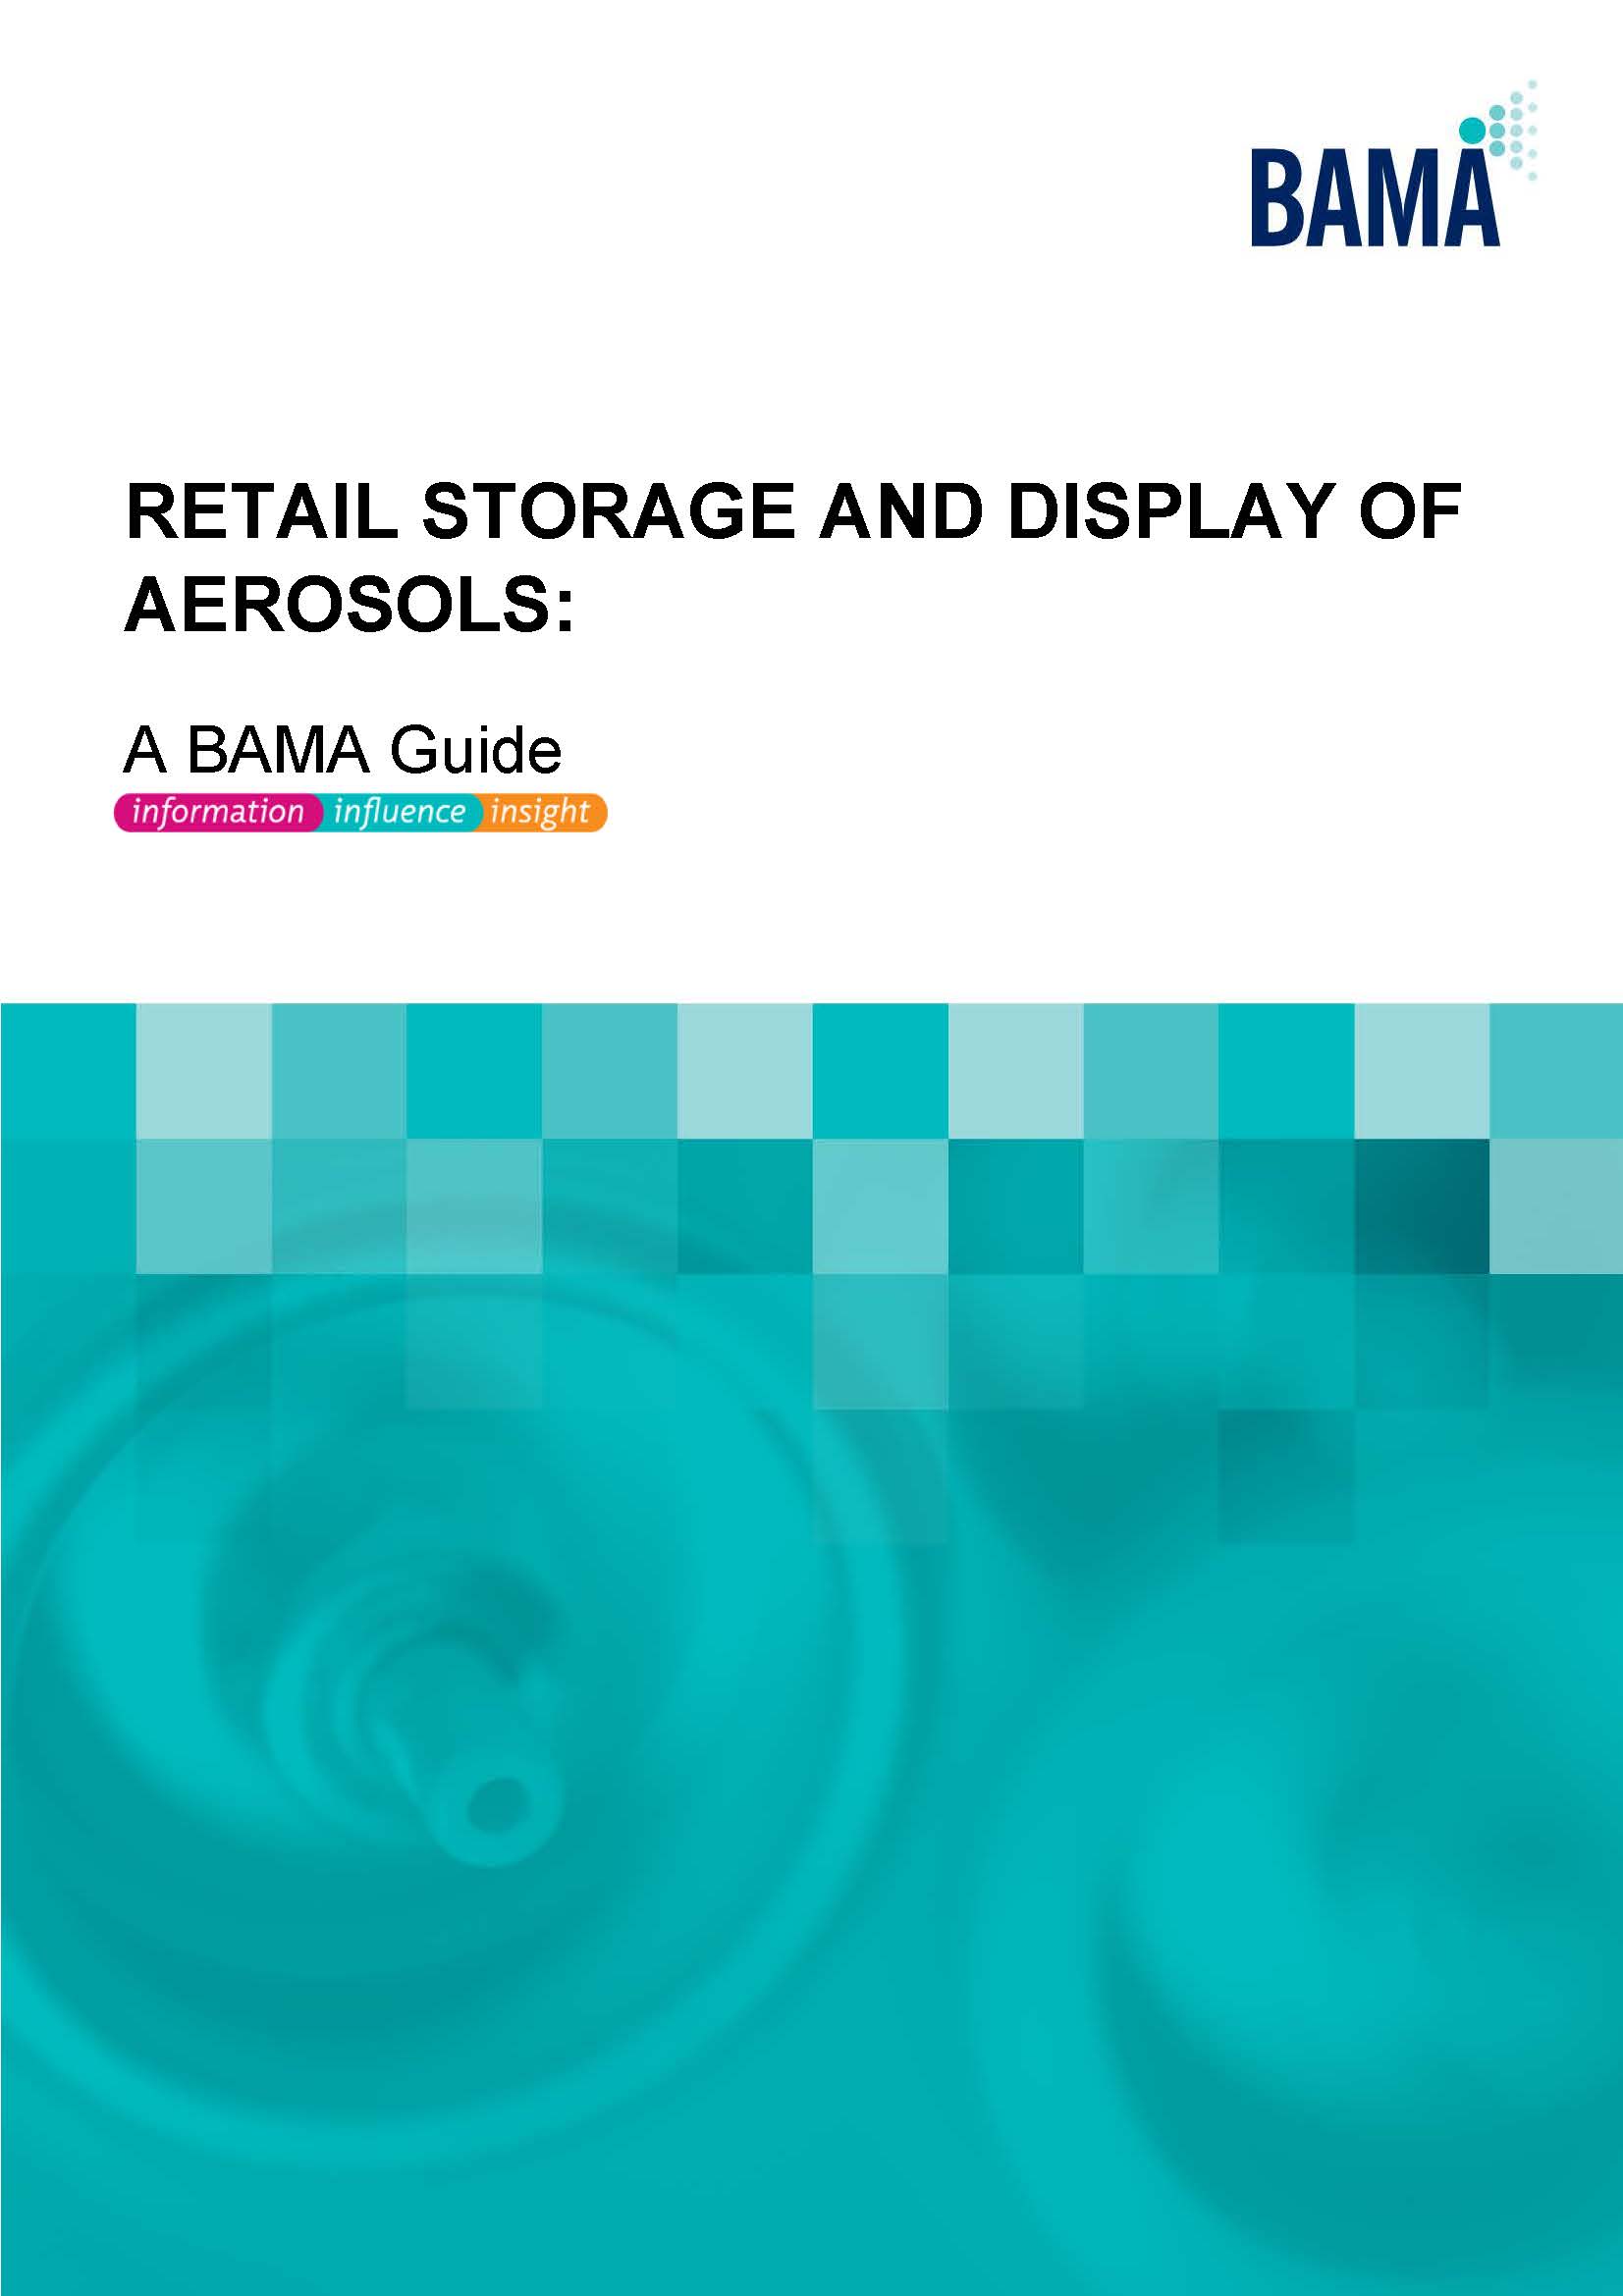 BAMA Guide to Retail Storage & Display - AVAILABLE SOON